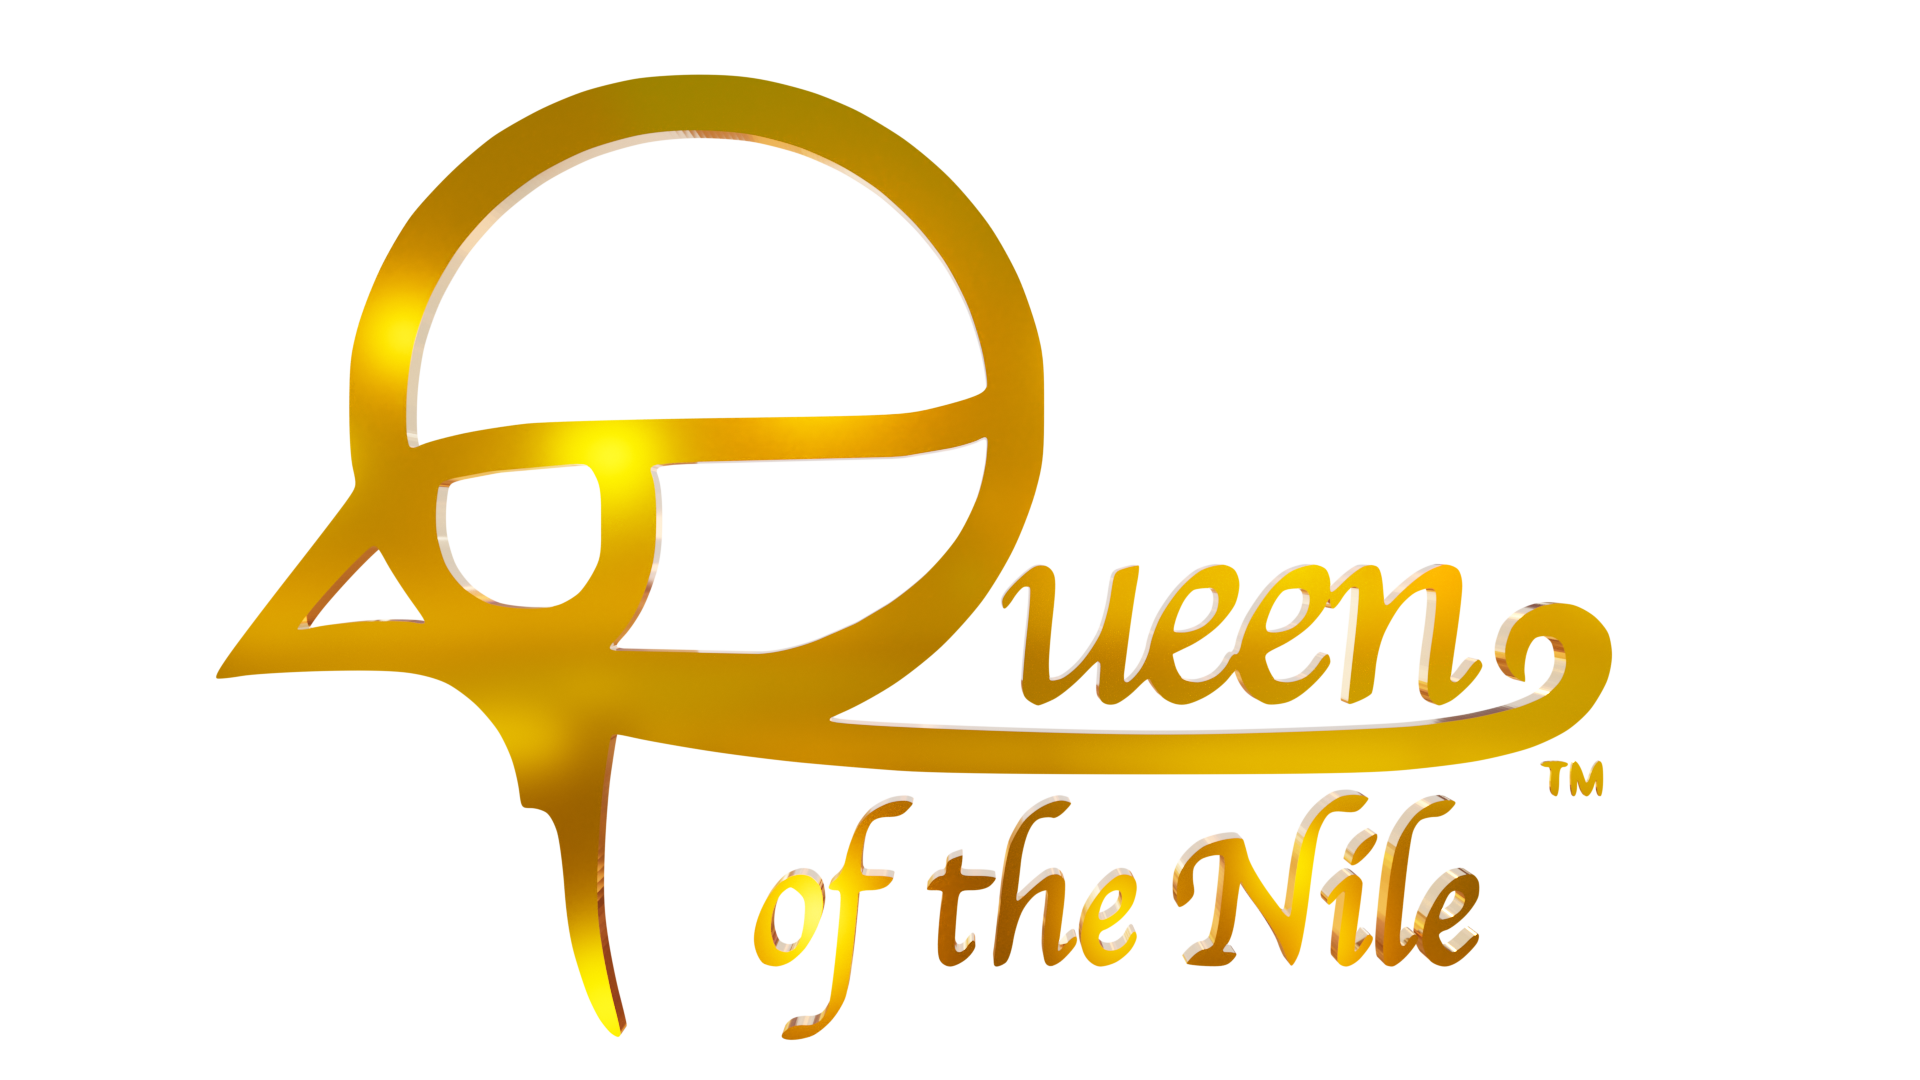 Queen Of the Nile